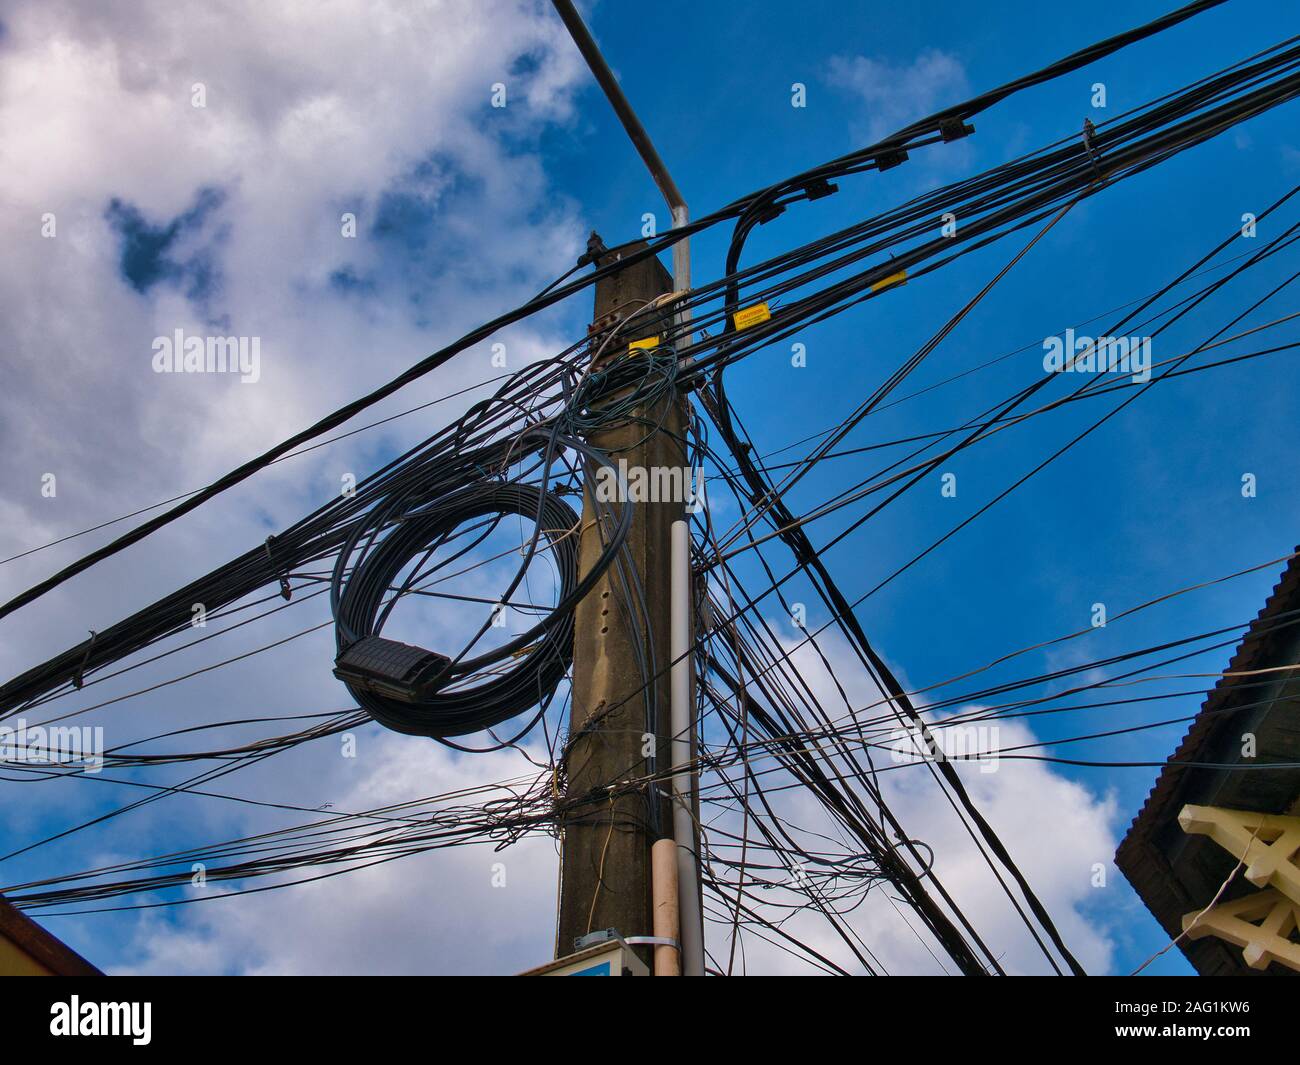 Chaotic electrical supply cabling on a pole on a street in Kampot, Cambodia Stock Photo